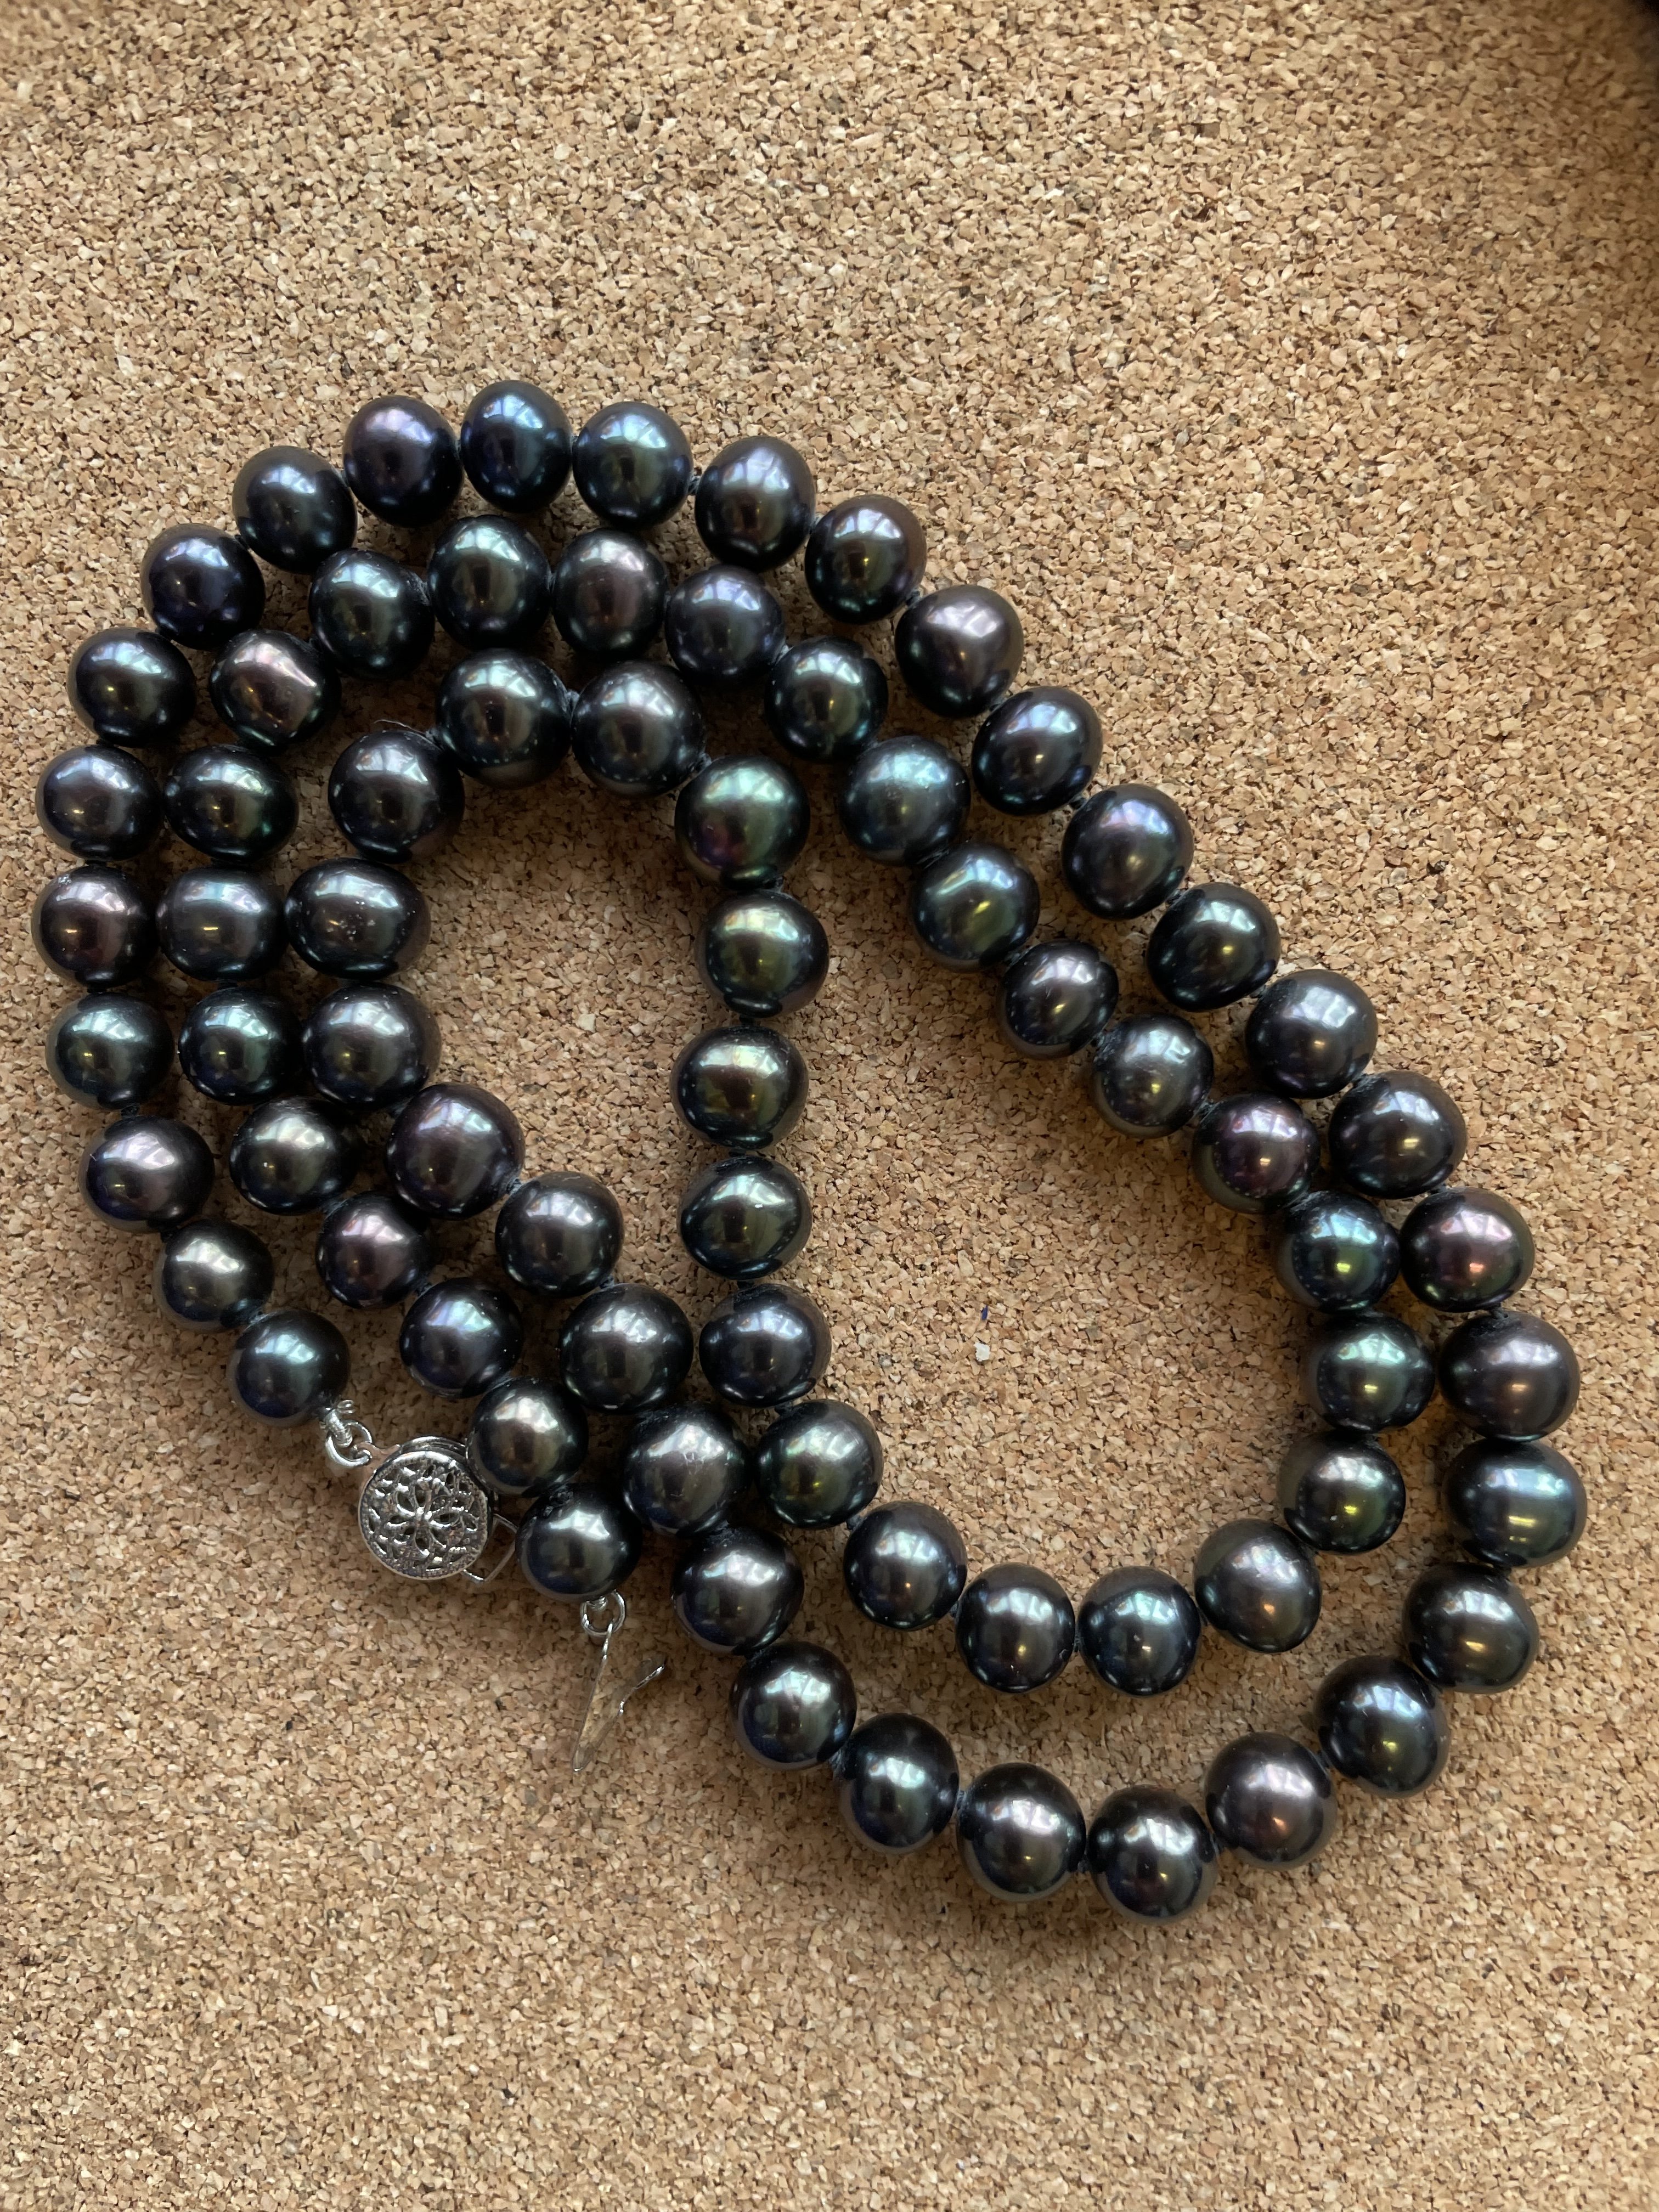 What type of black pearls do I have?